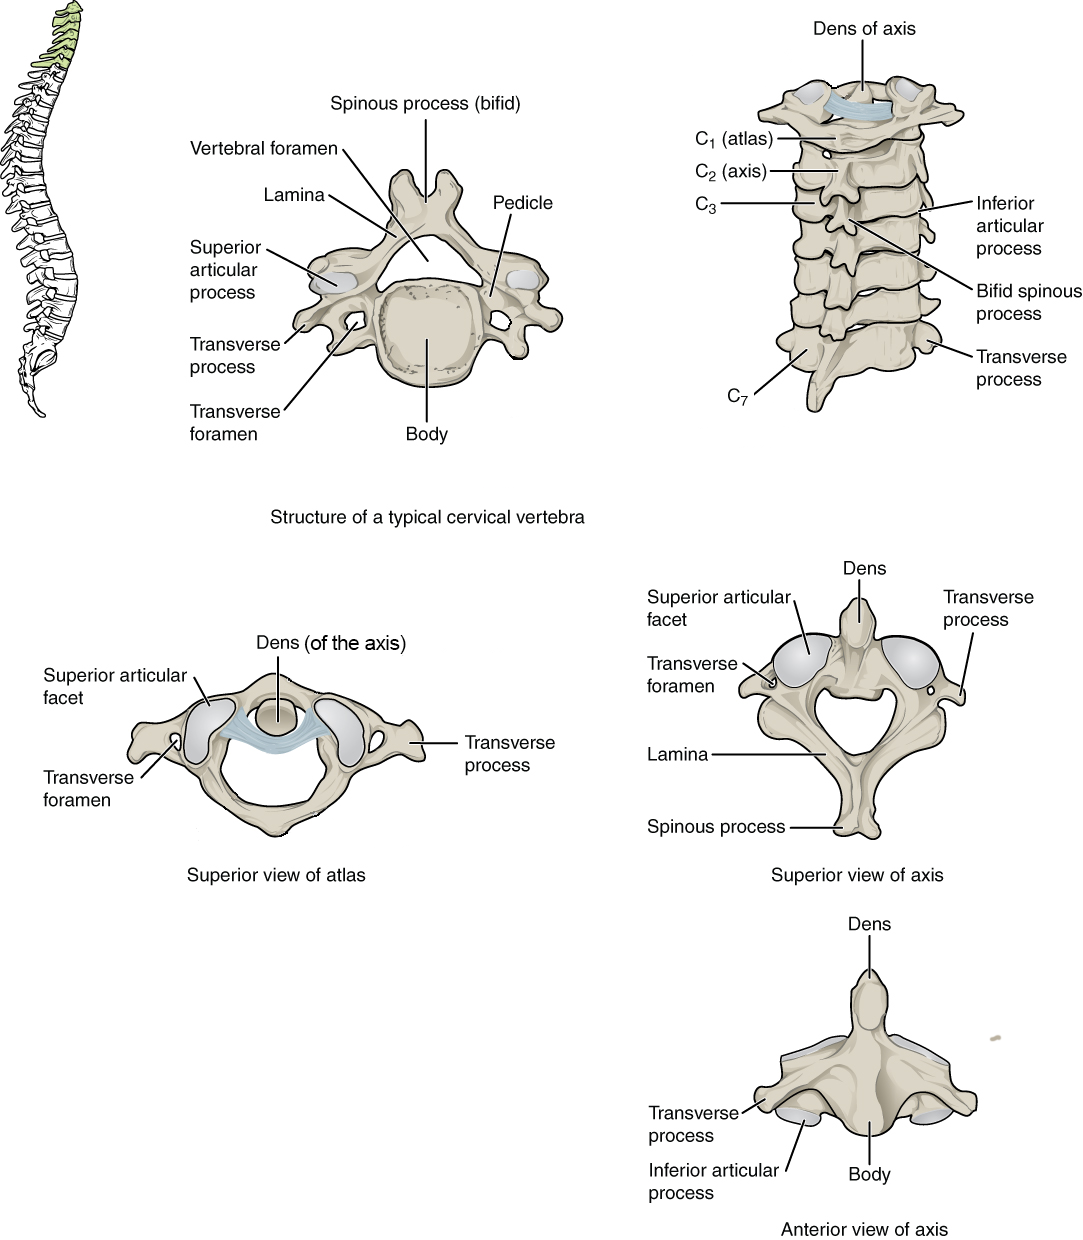 A typical cervical vertebra has a small body, a bifid spinous process, transverse processes that have a transverse foramen, and a triangular vertebral foramen. The atlas (C1 vertebra) does not have a body or spinous process. The axis (C2 vertebra) has the upward projecting dens, which articulates with the atlas.